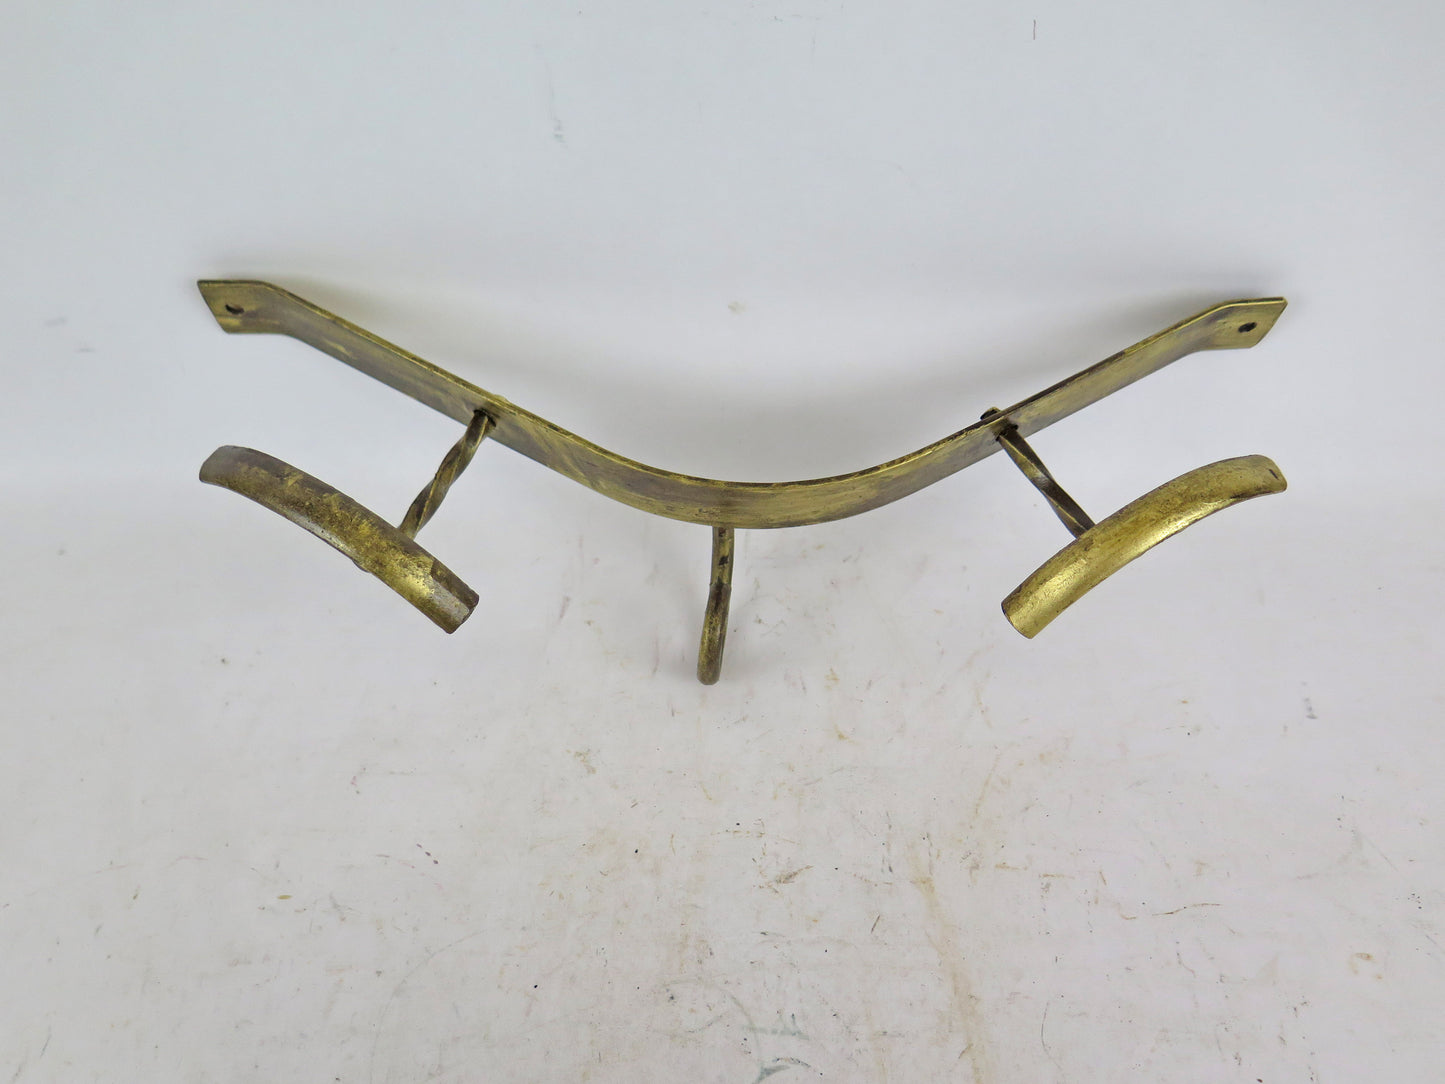 OLD GOLDEN WROUGHT IRON WALL COAT RACK WITH 2 COAT HOOKS CH2